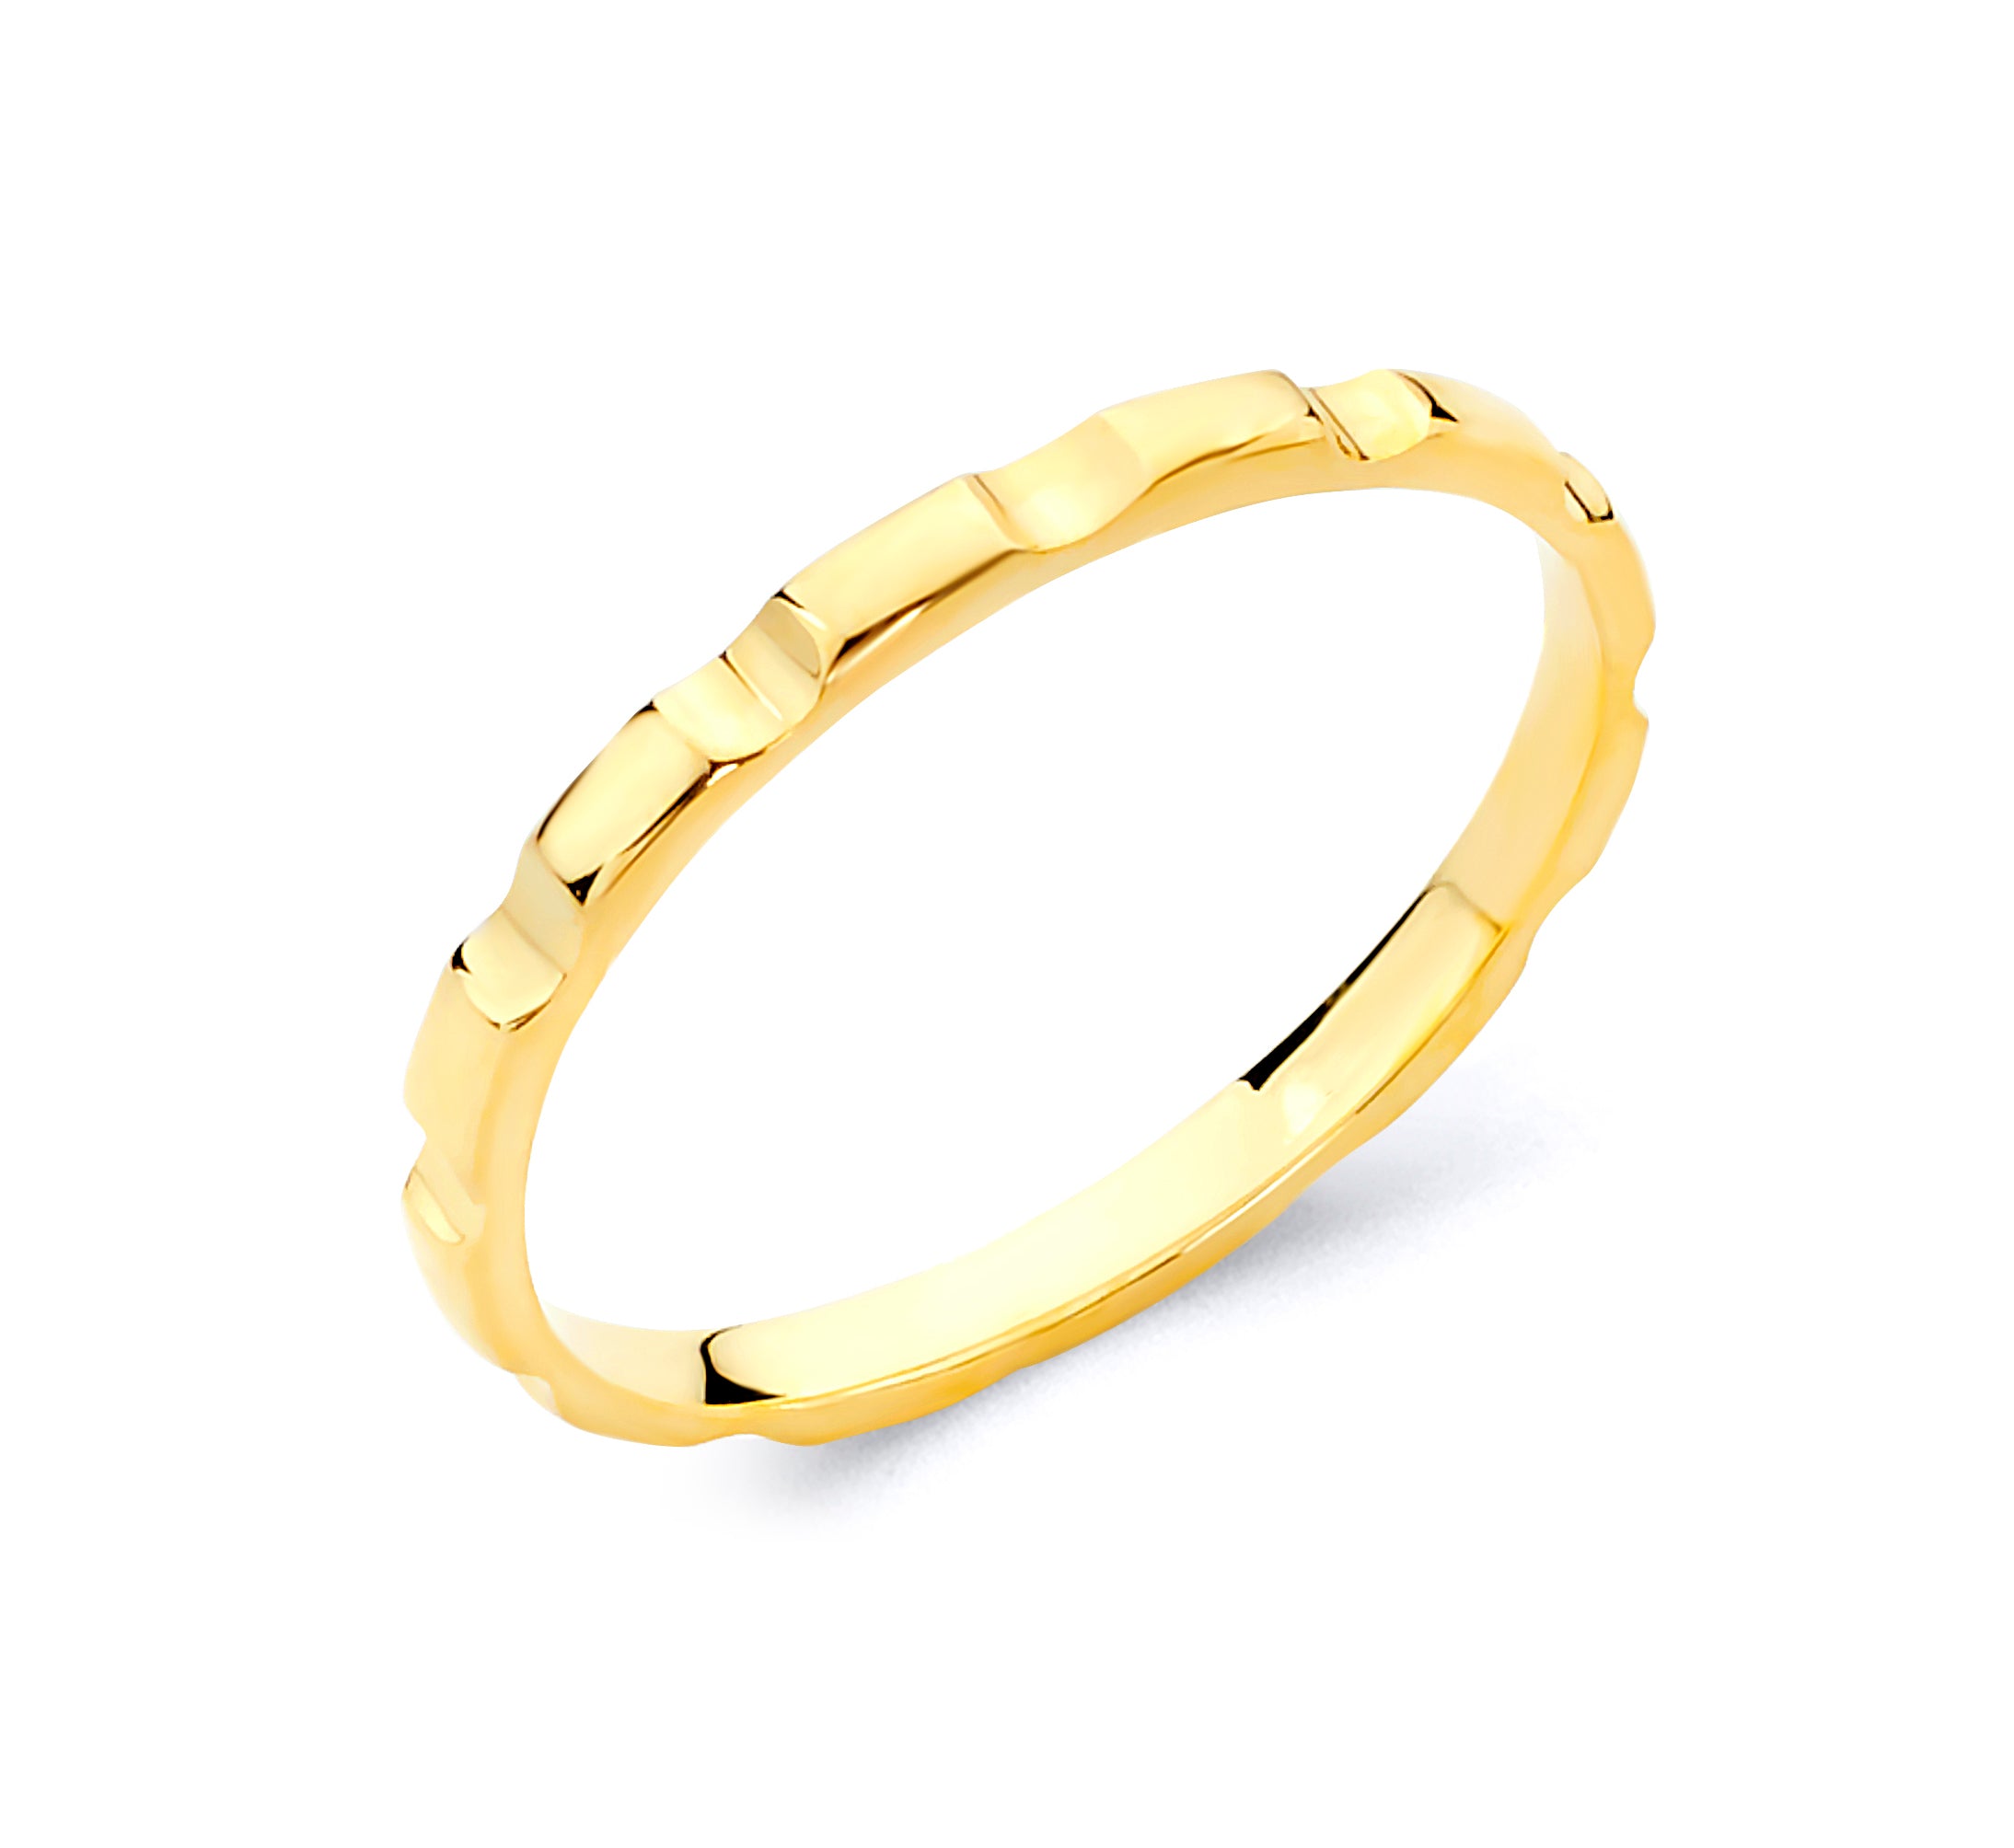 Solid Gold Eternity Stack Ring - 10k or 14k